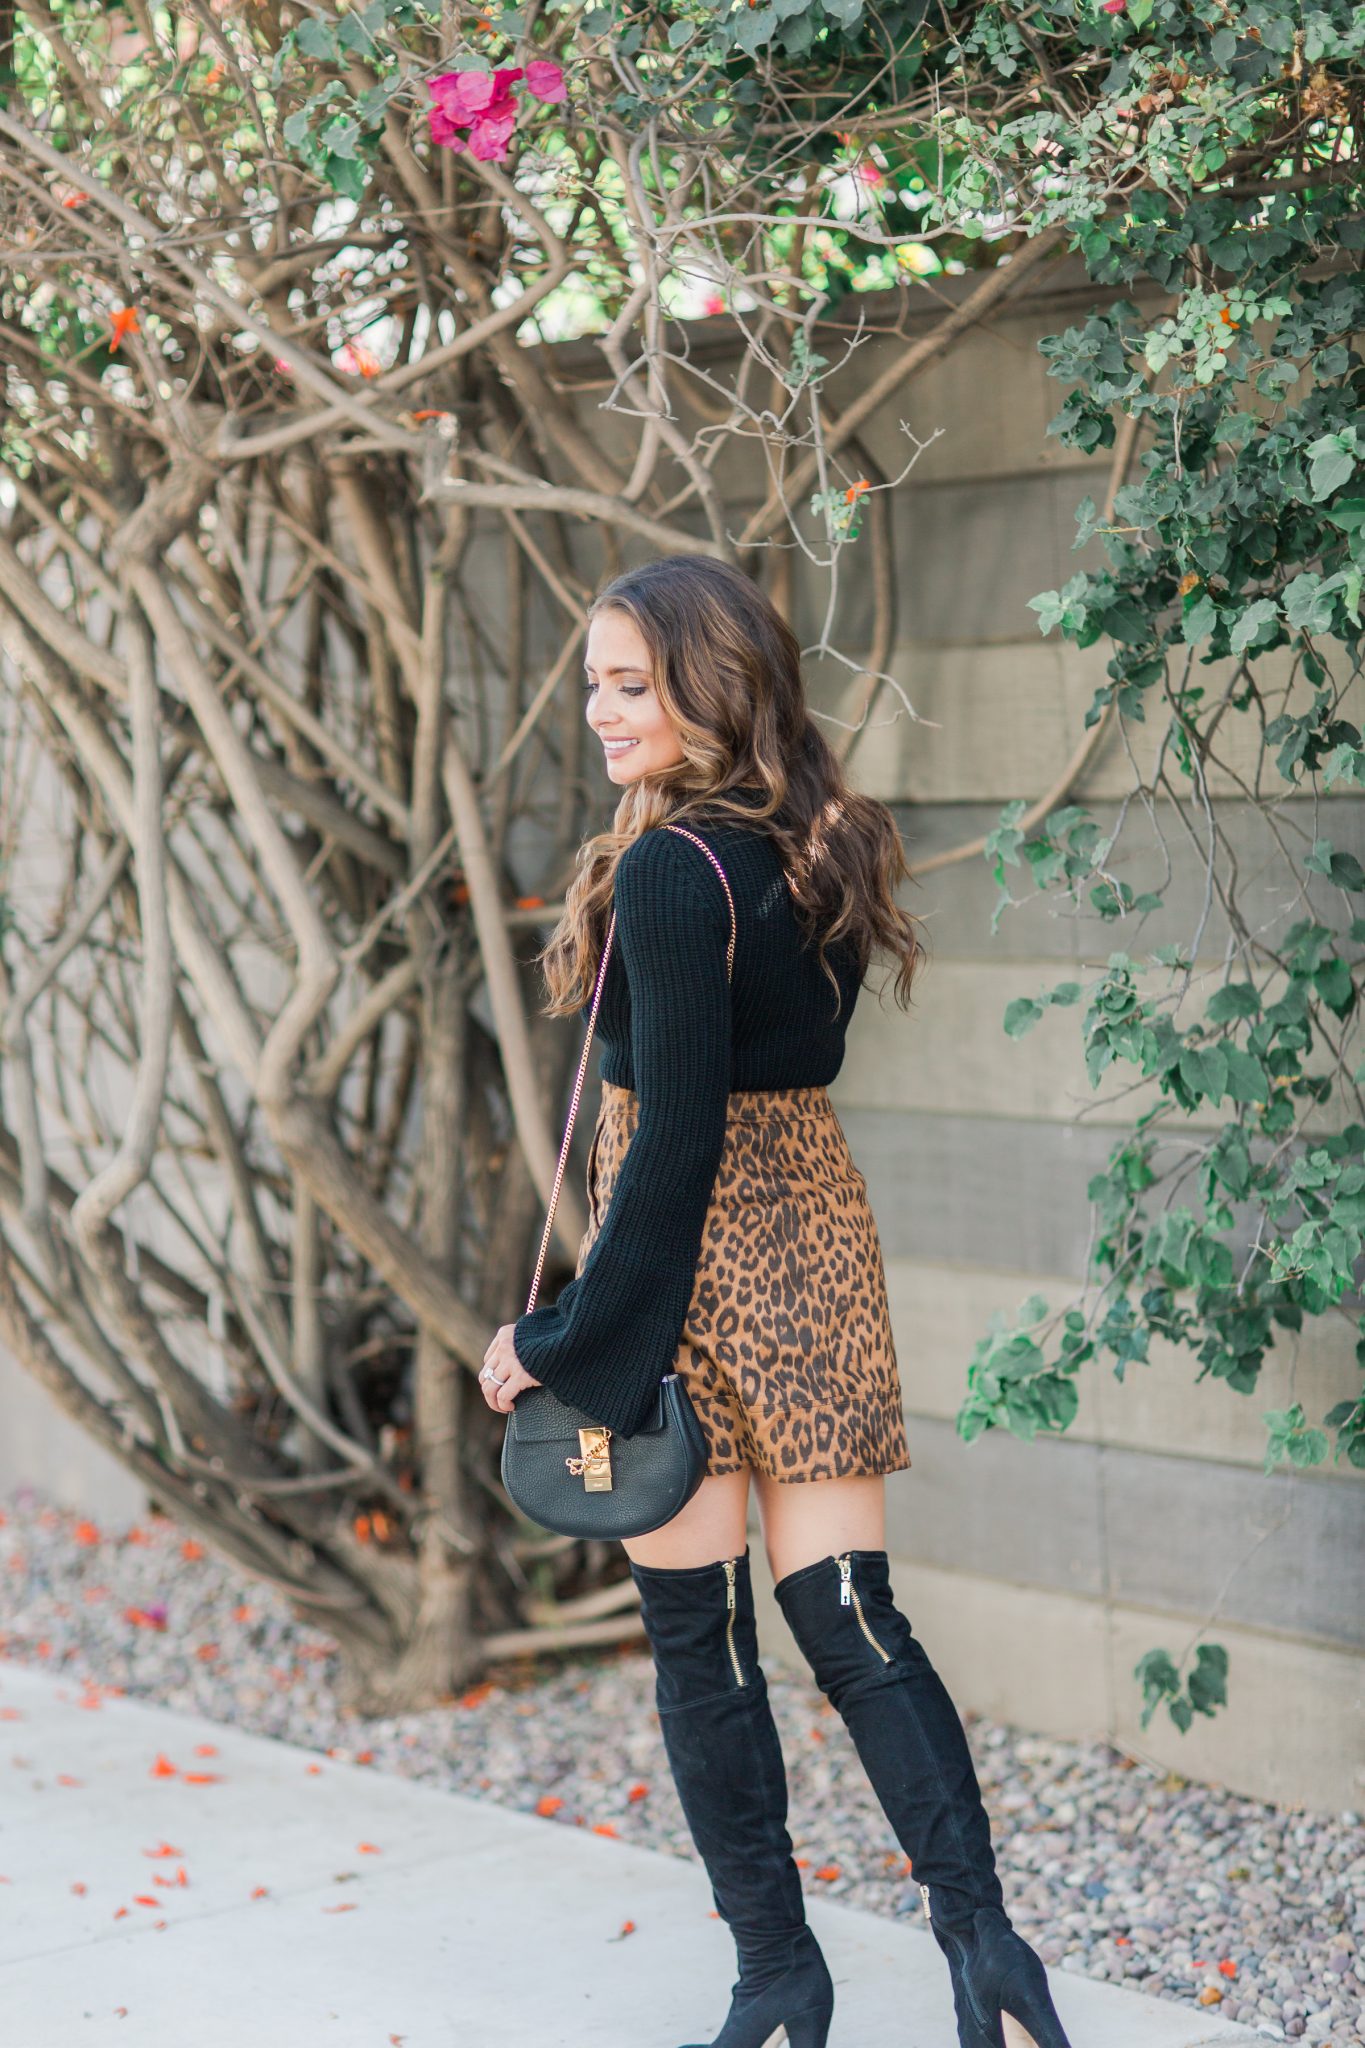 Maxie Elle | Leopard Skirt and OTK Boots - 27 Fun Facts About popular Orange County style blogger Maxie Elise